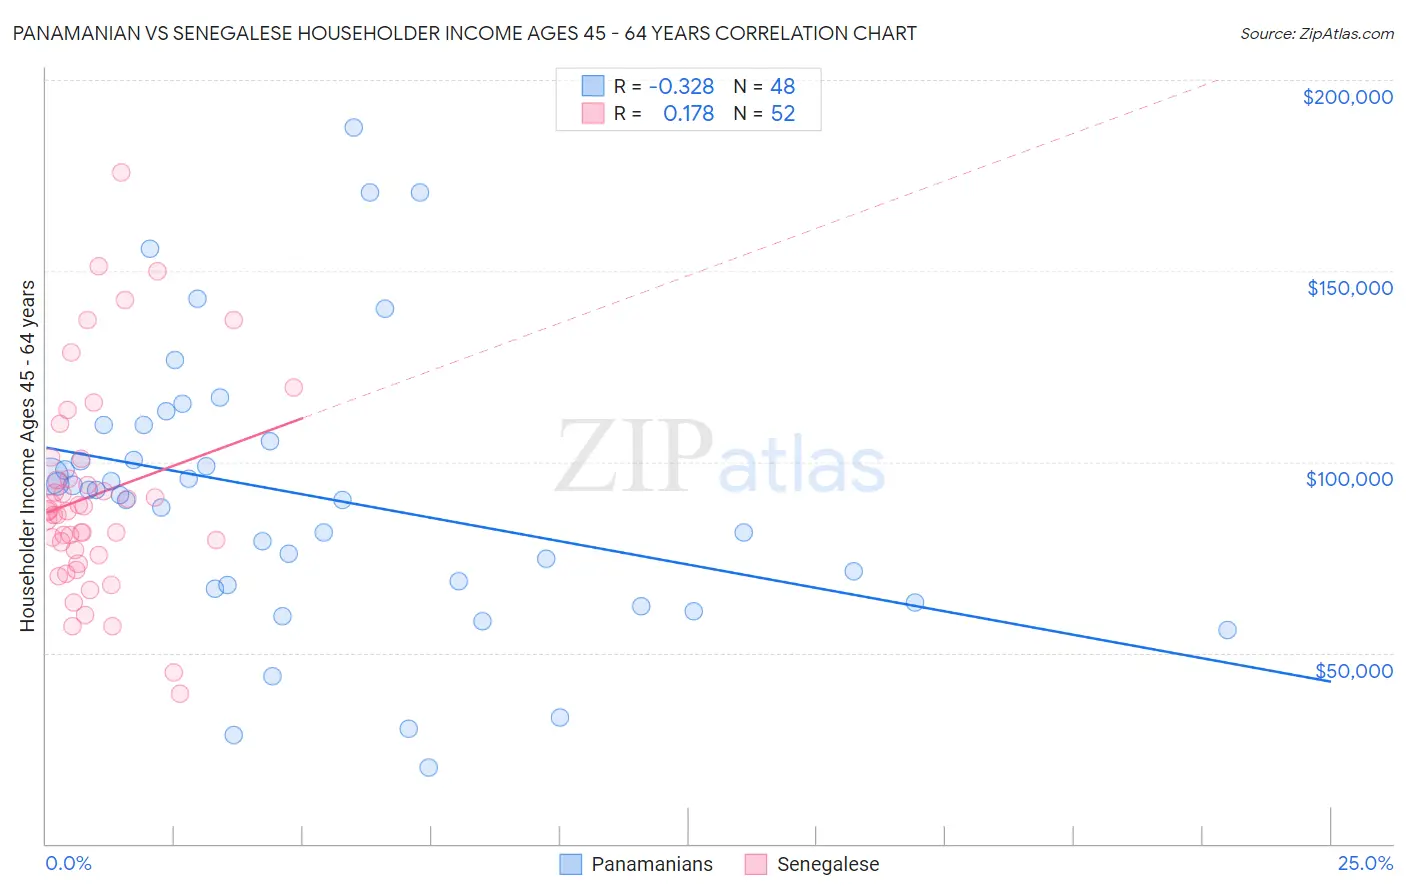 Panamanian vs Senegalese Householder Income Ages 45 - 64 years